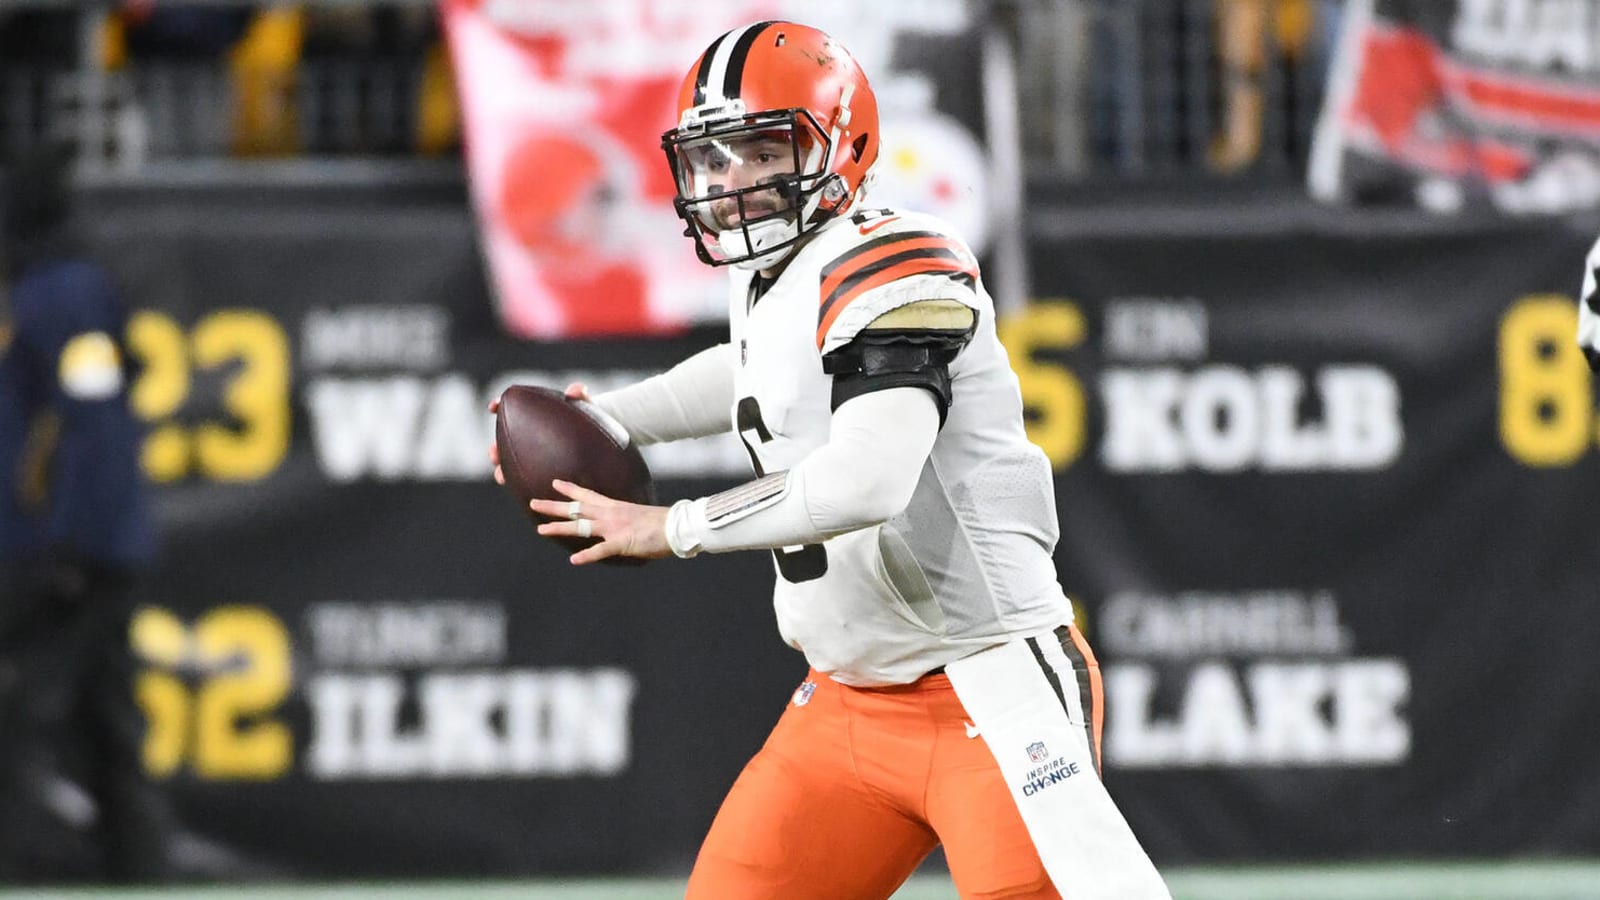 QB stealing signs?: Tampa Bay's Baker Mayfield takes shot at Astros